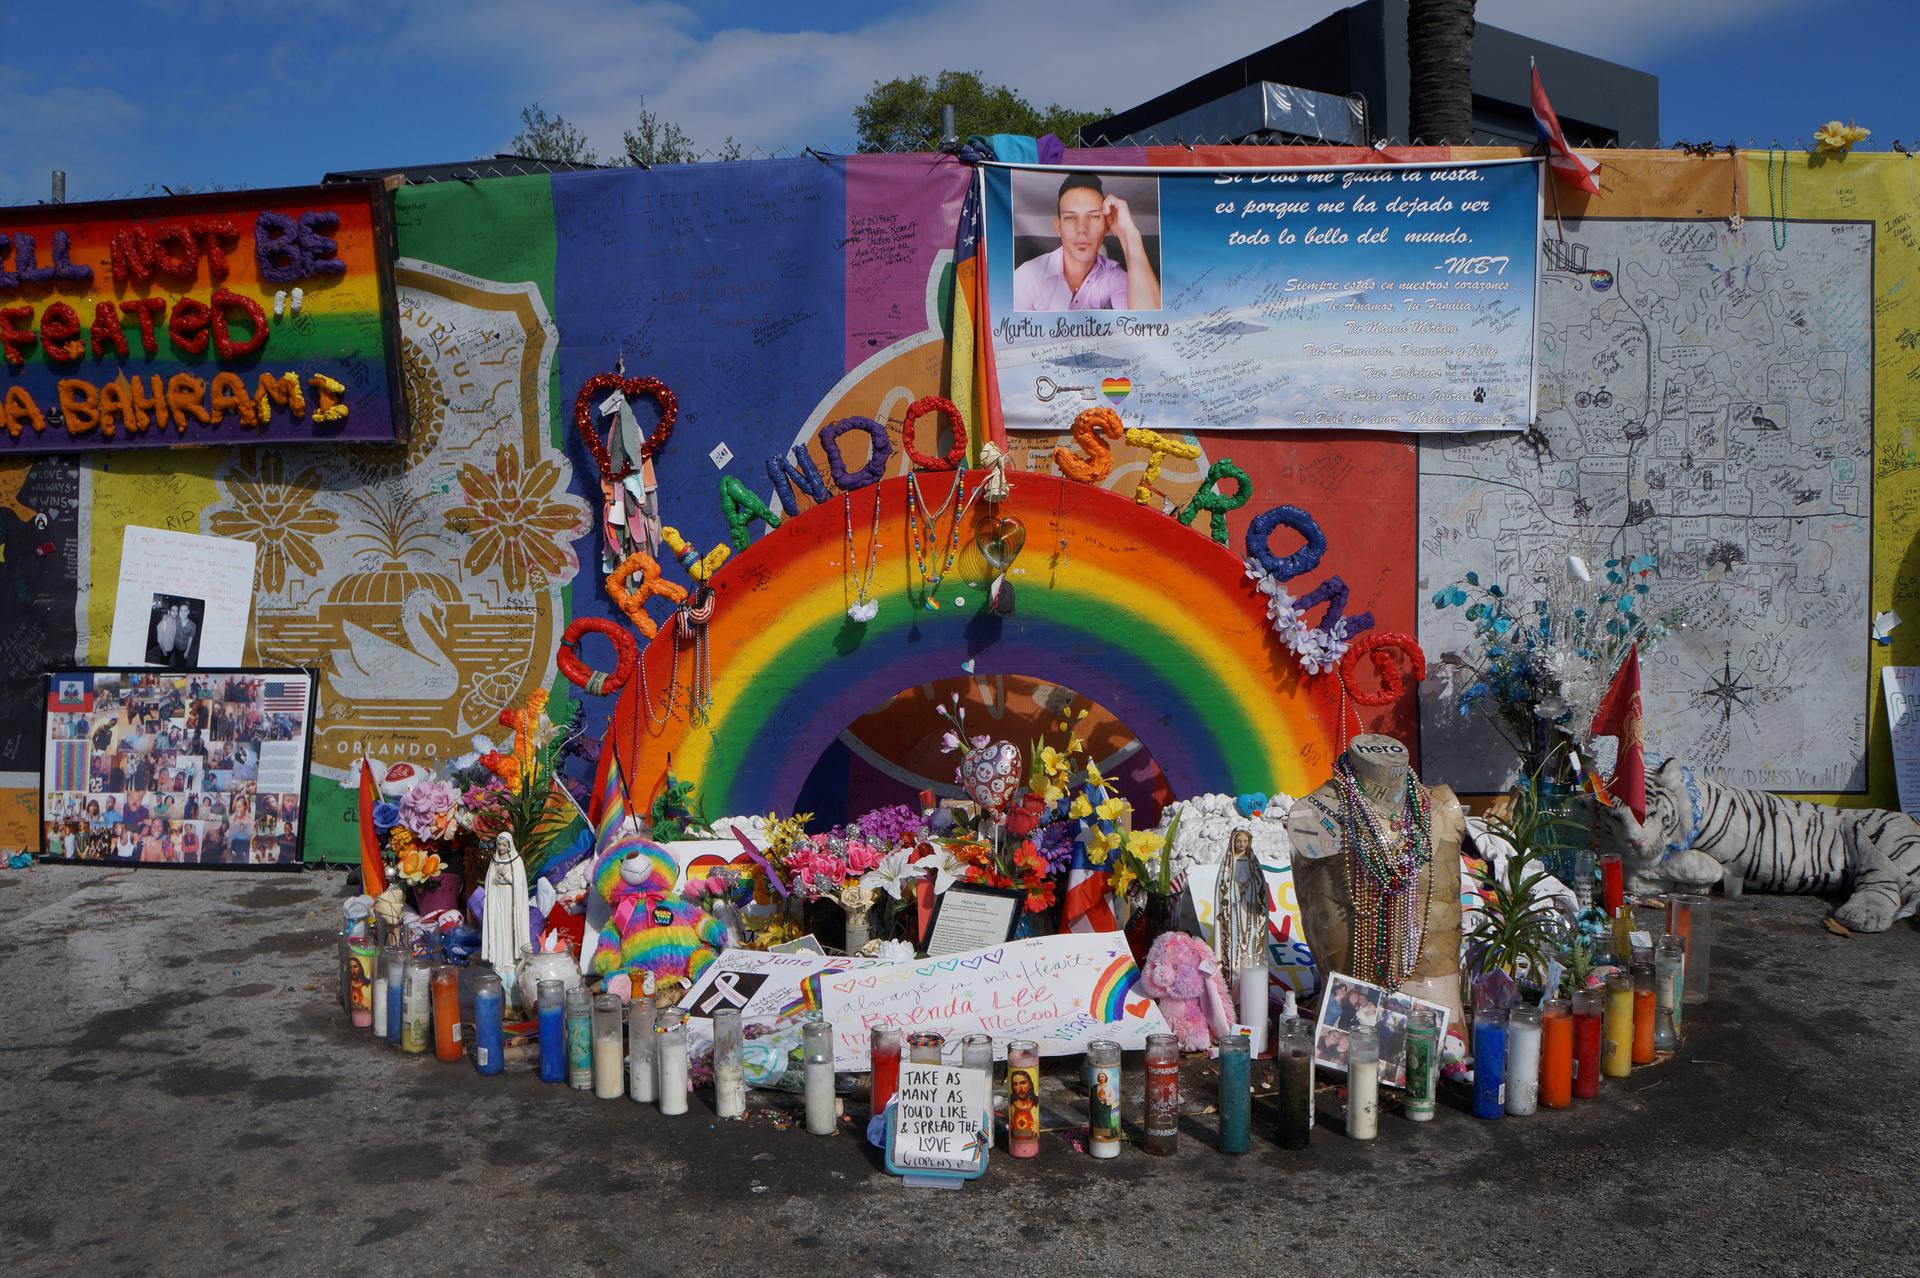 The parking lot at the Pulse nightclub in Orlando, Florida